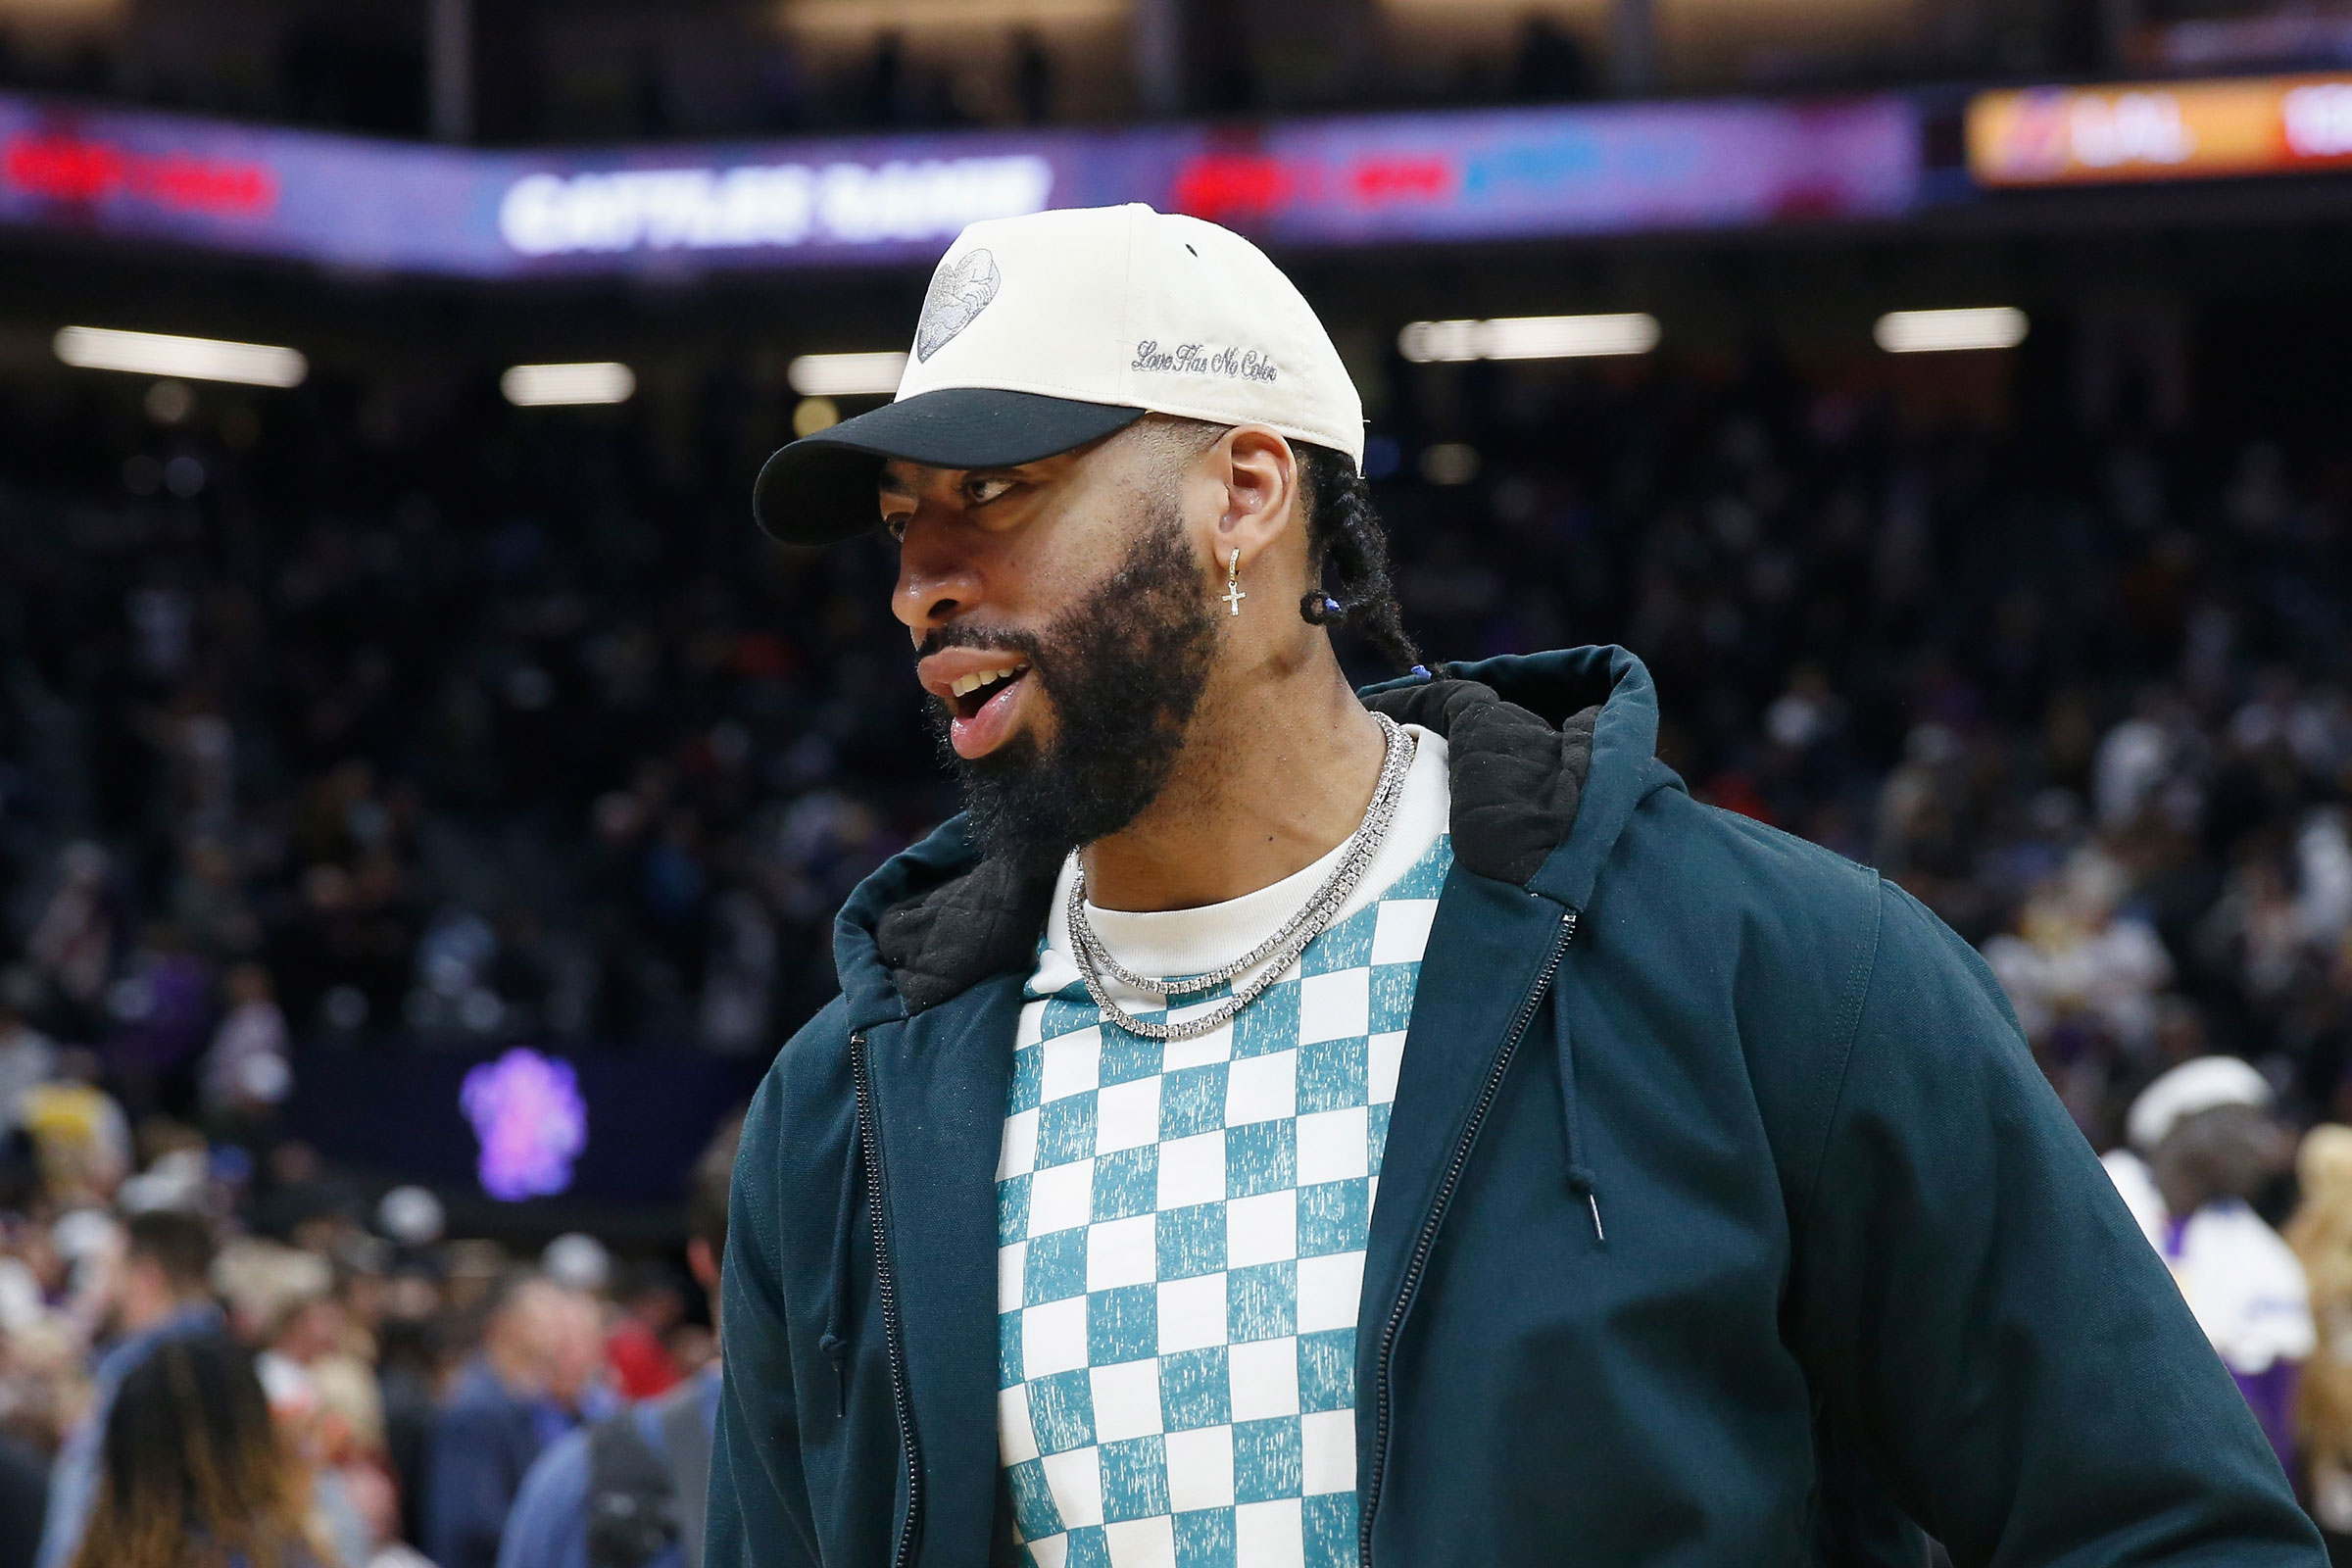 Anthony Davis of the Los Angeles Lakers looks on after the game against the Sacramento Kings at Golden 1 Center on Jan. 7, 2023 in Sacramento, Calif. (Lachlan Cunningham—Getty Images)